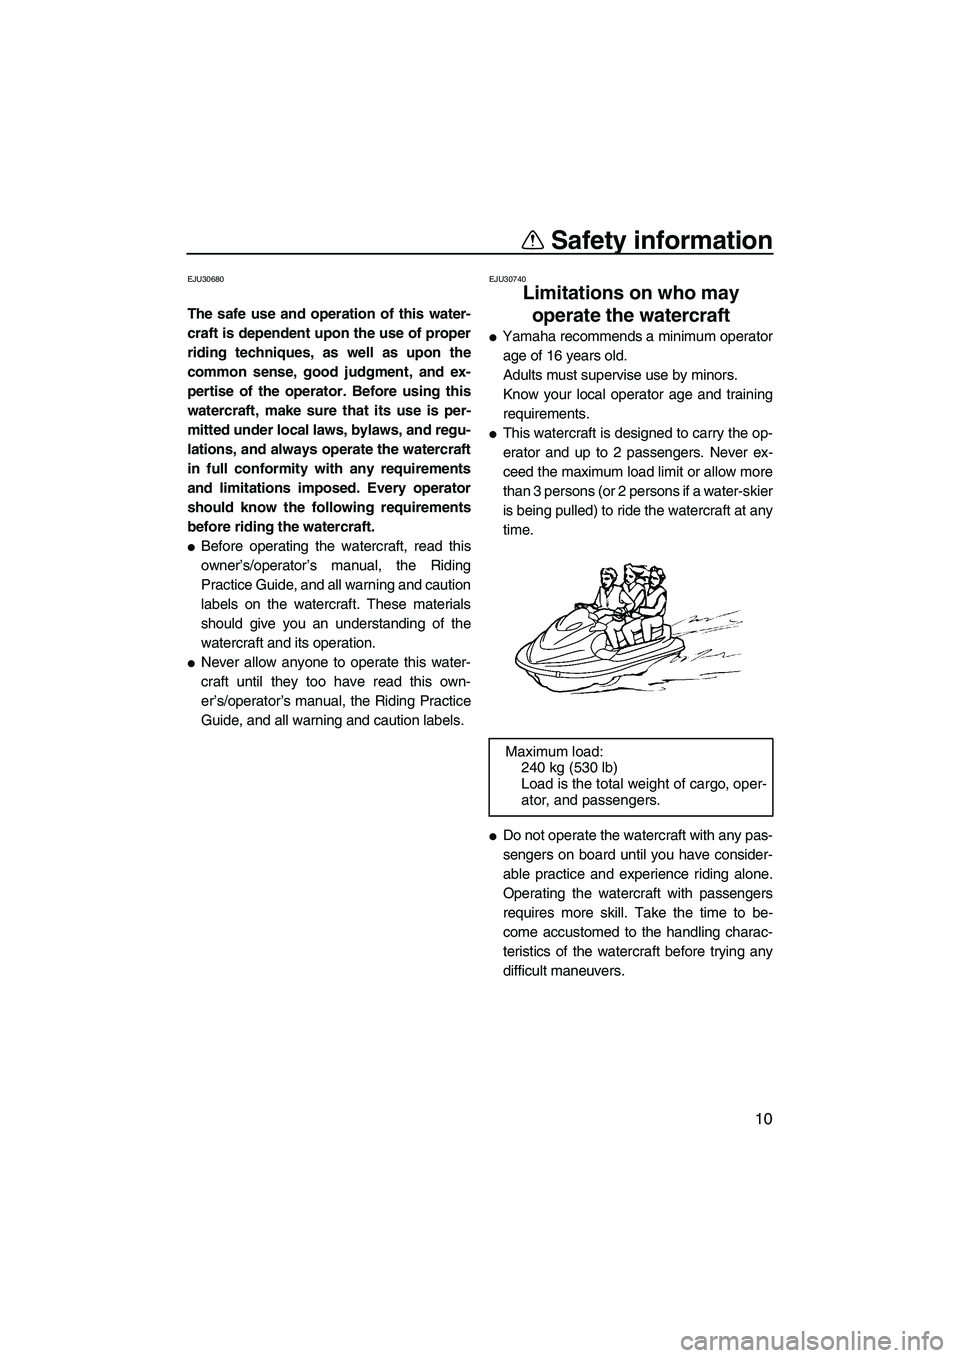 YAMAHA FX HO CRUISER 2007  Owners Manual Safety information
10
EJU30680
The safe use and operation of this water-
craft is dependent upon the use of proper
riding techniques, as well as upon the
common sense, good judgment, and ex-
pertise o